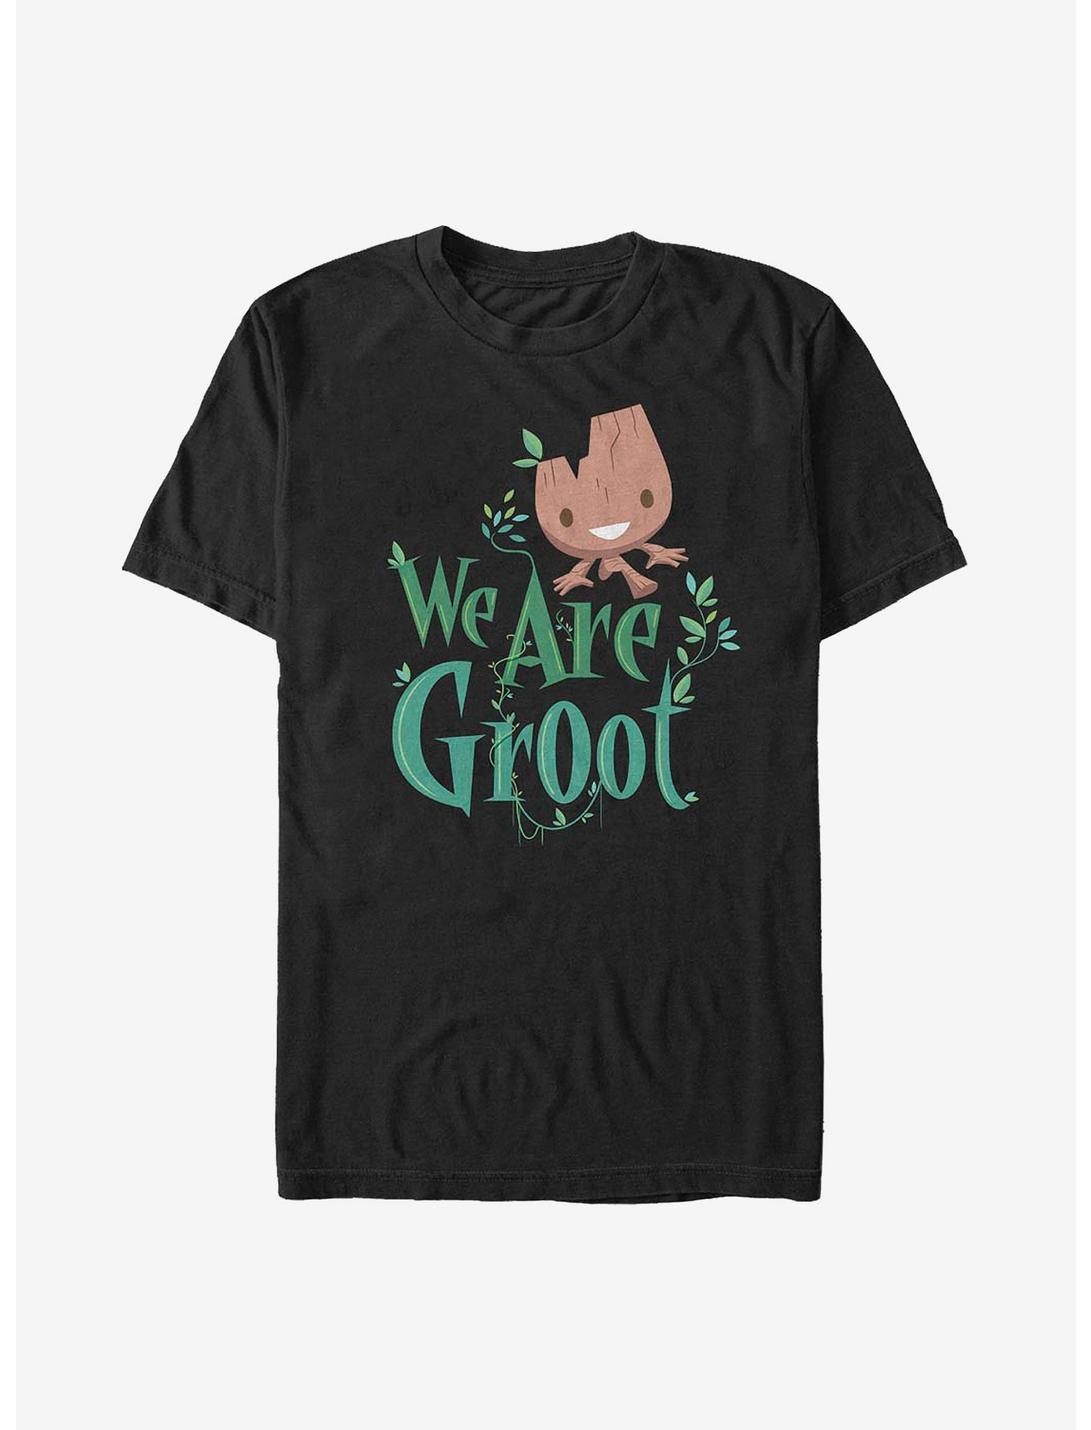 Marvel Guardians Of The Galaxy Groots World T-Shirt, BLACK, hi-res